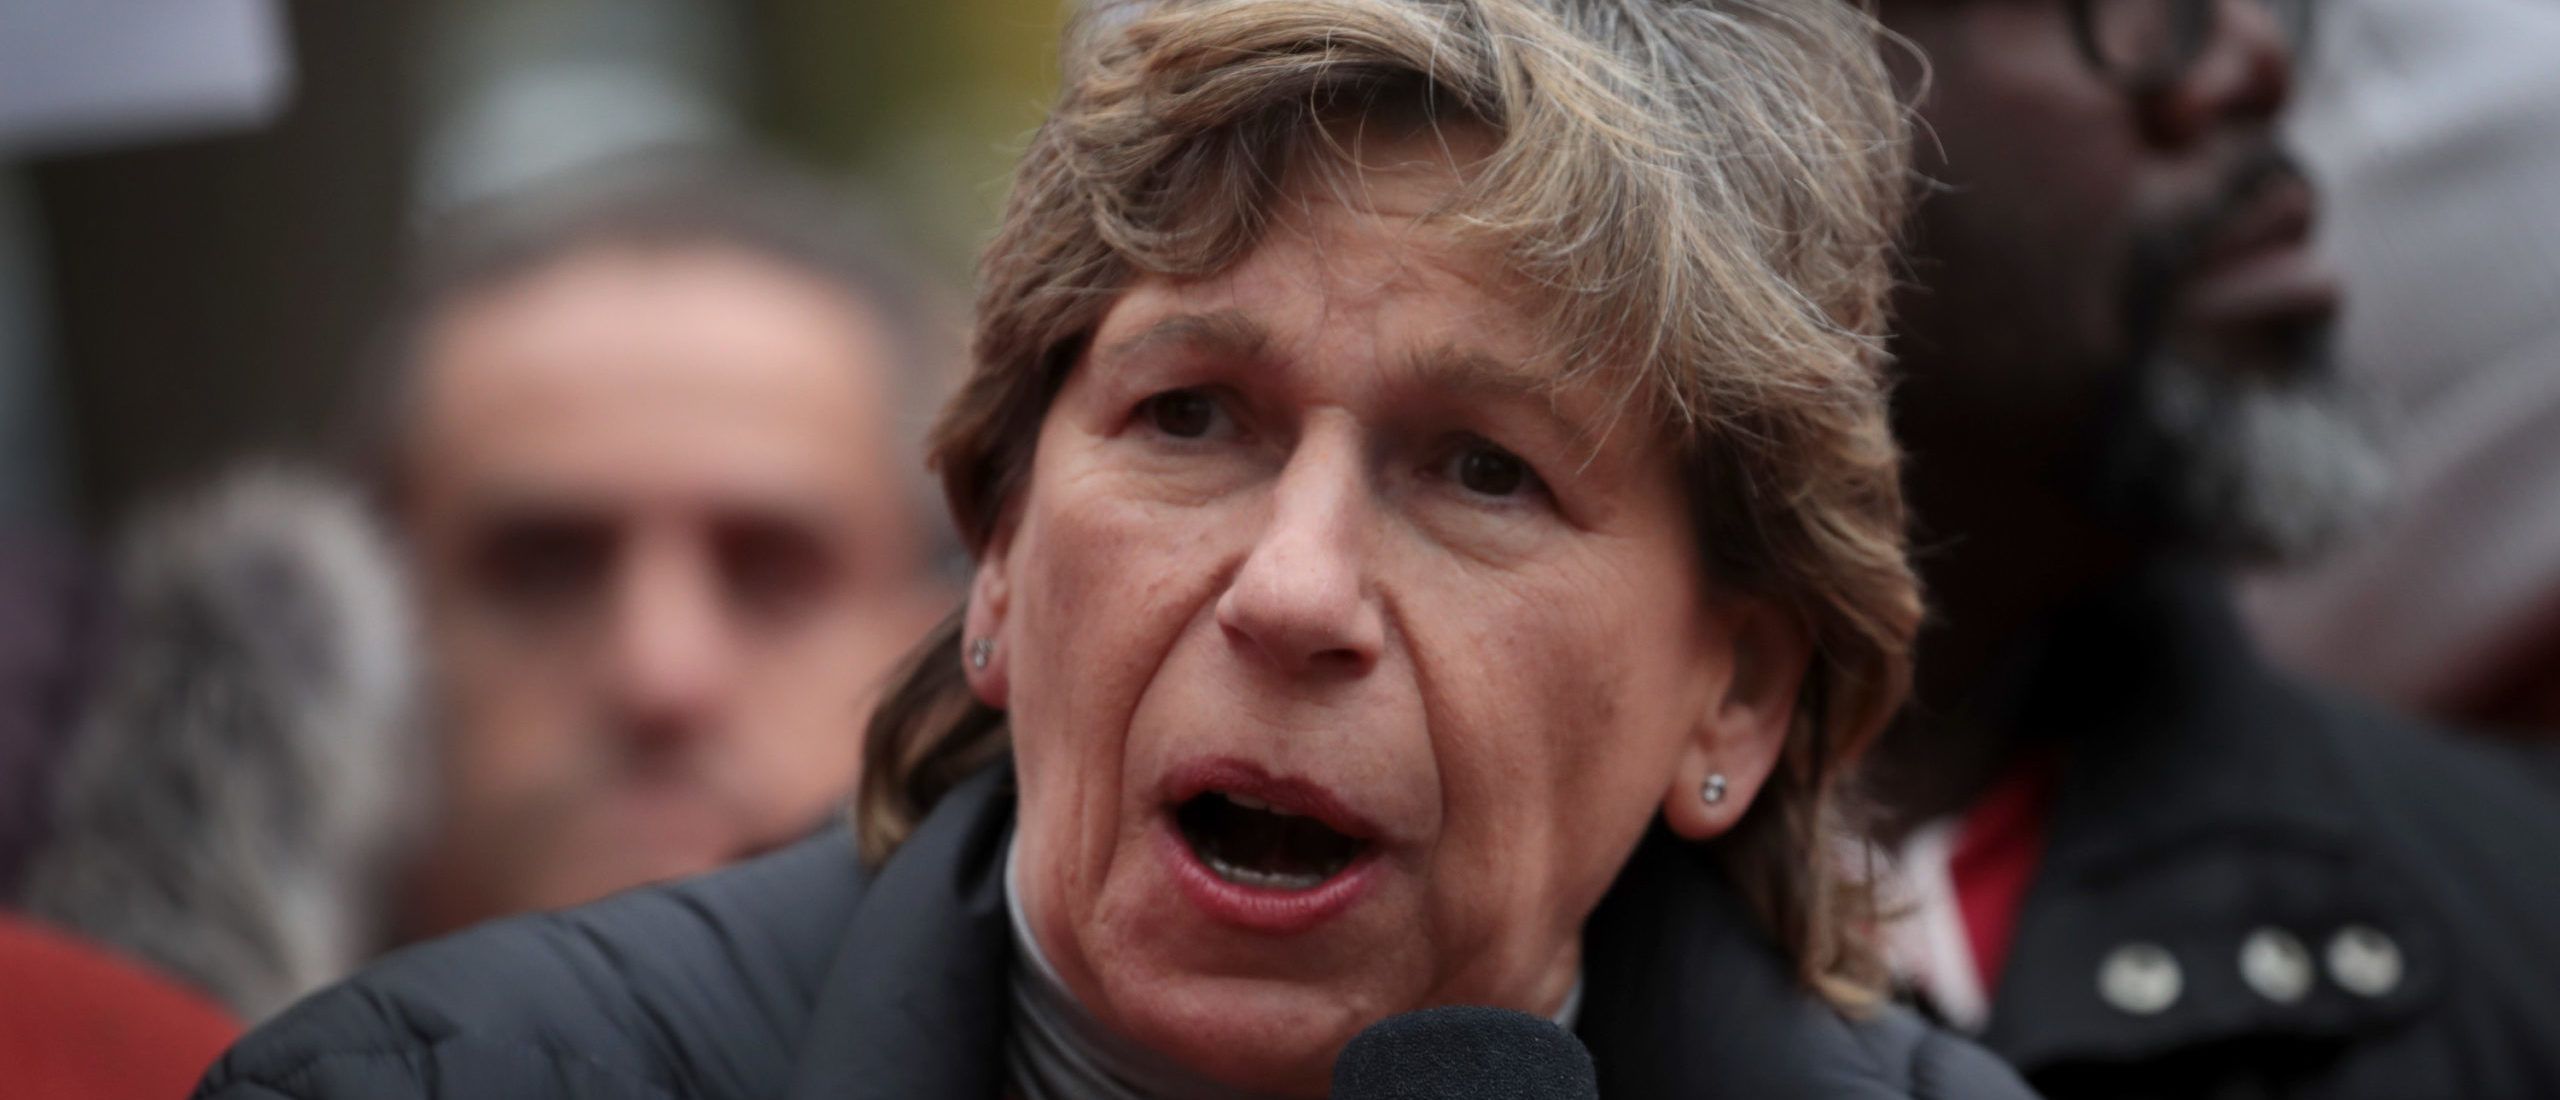 CHICAGO, ILLINOIS - OCTOBER 22: American Federation of Teachers (AFT) president Randi Weingarten visits with striking Chicago teachers at Oscar DePriest Elementary School on October 22, 2019 in Chicago, Illinois. About 25,000 Chicago school teachers went on strike last week after the Chicago Teachers Union (CTU) failed to reach a contract agreement with the city. With about 300,000 students, Chicago has the third largest public school system in the nation. (Photo by Scott Olson/Getty Images)